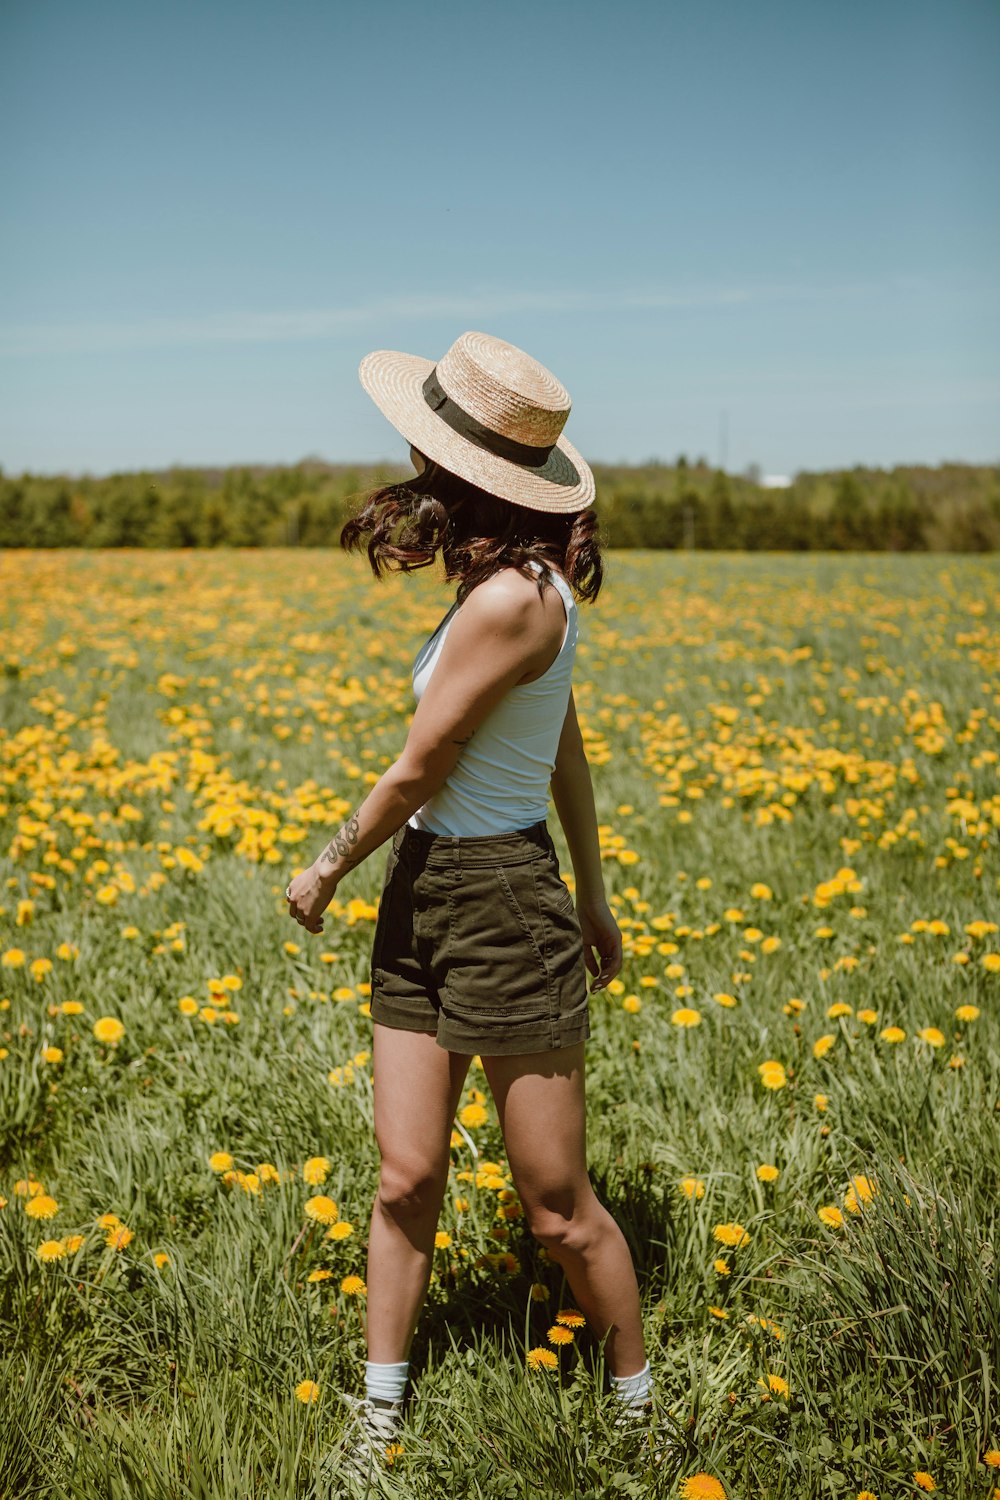 Woman in white tank top and black skirt standing on yellow flower field  during daytime photo – Free On Image on Unsplash